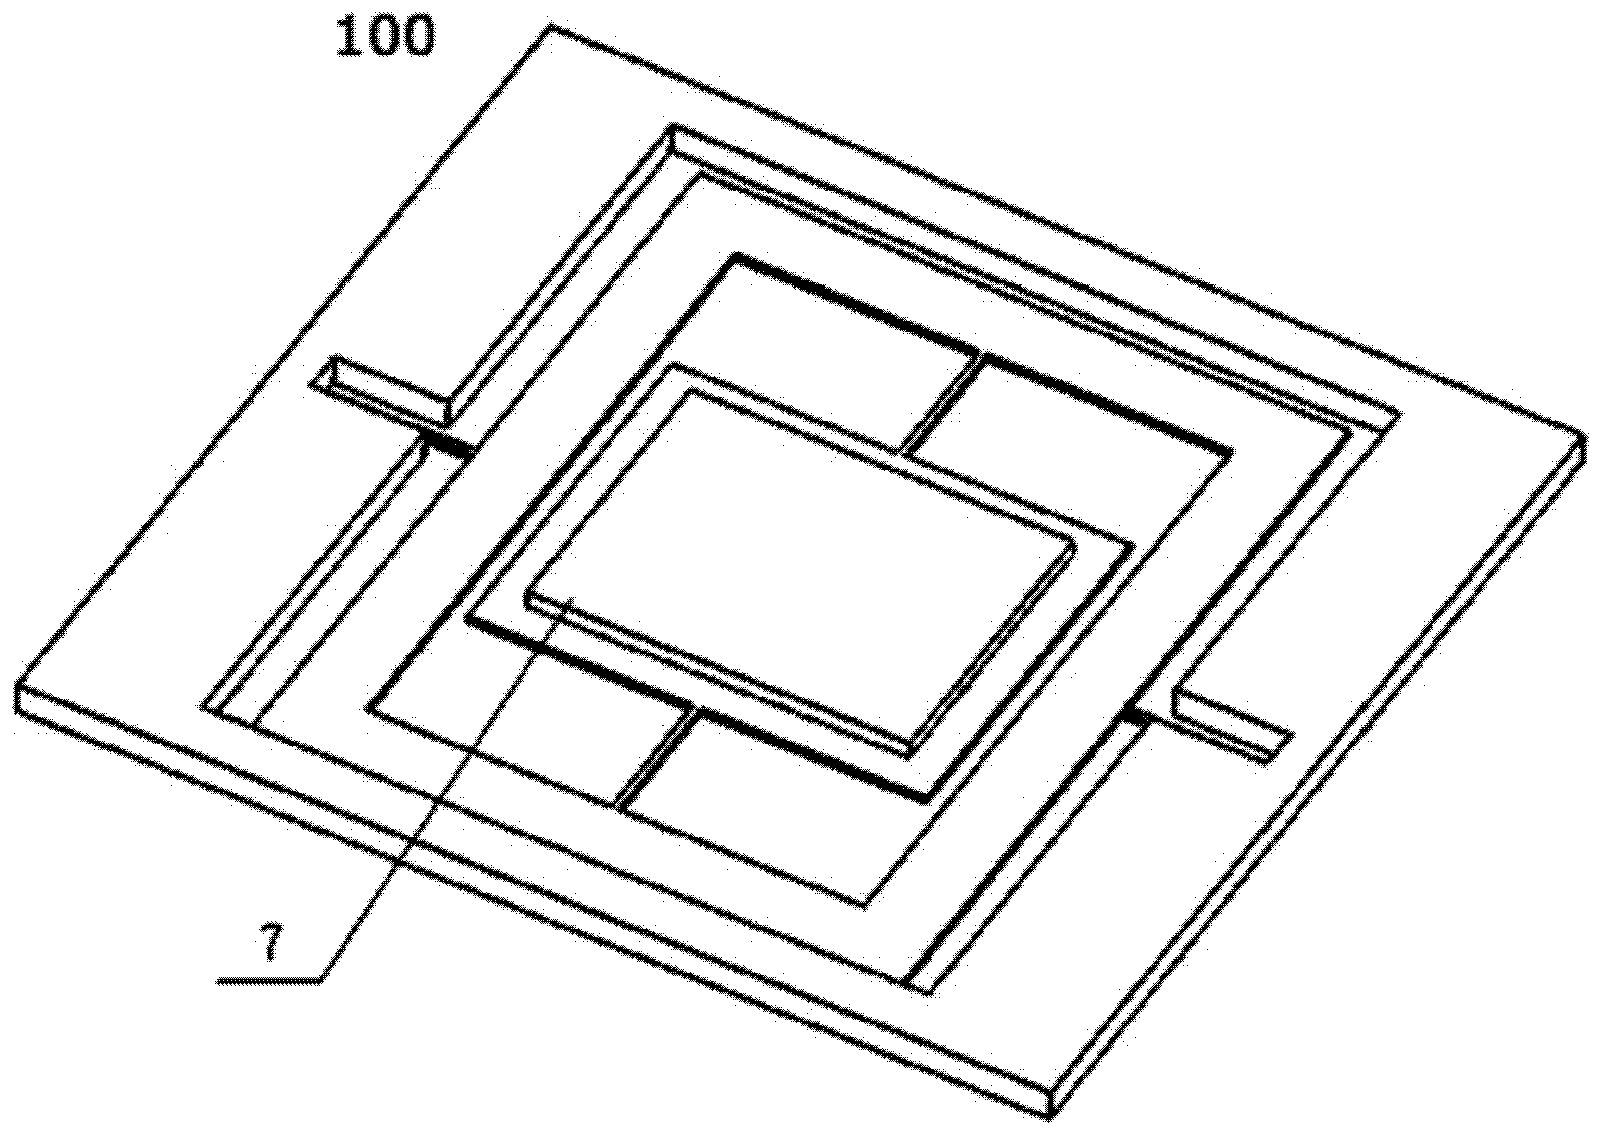 Electromagnetic-driven miniature two-dimensional scanning mirror device